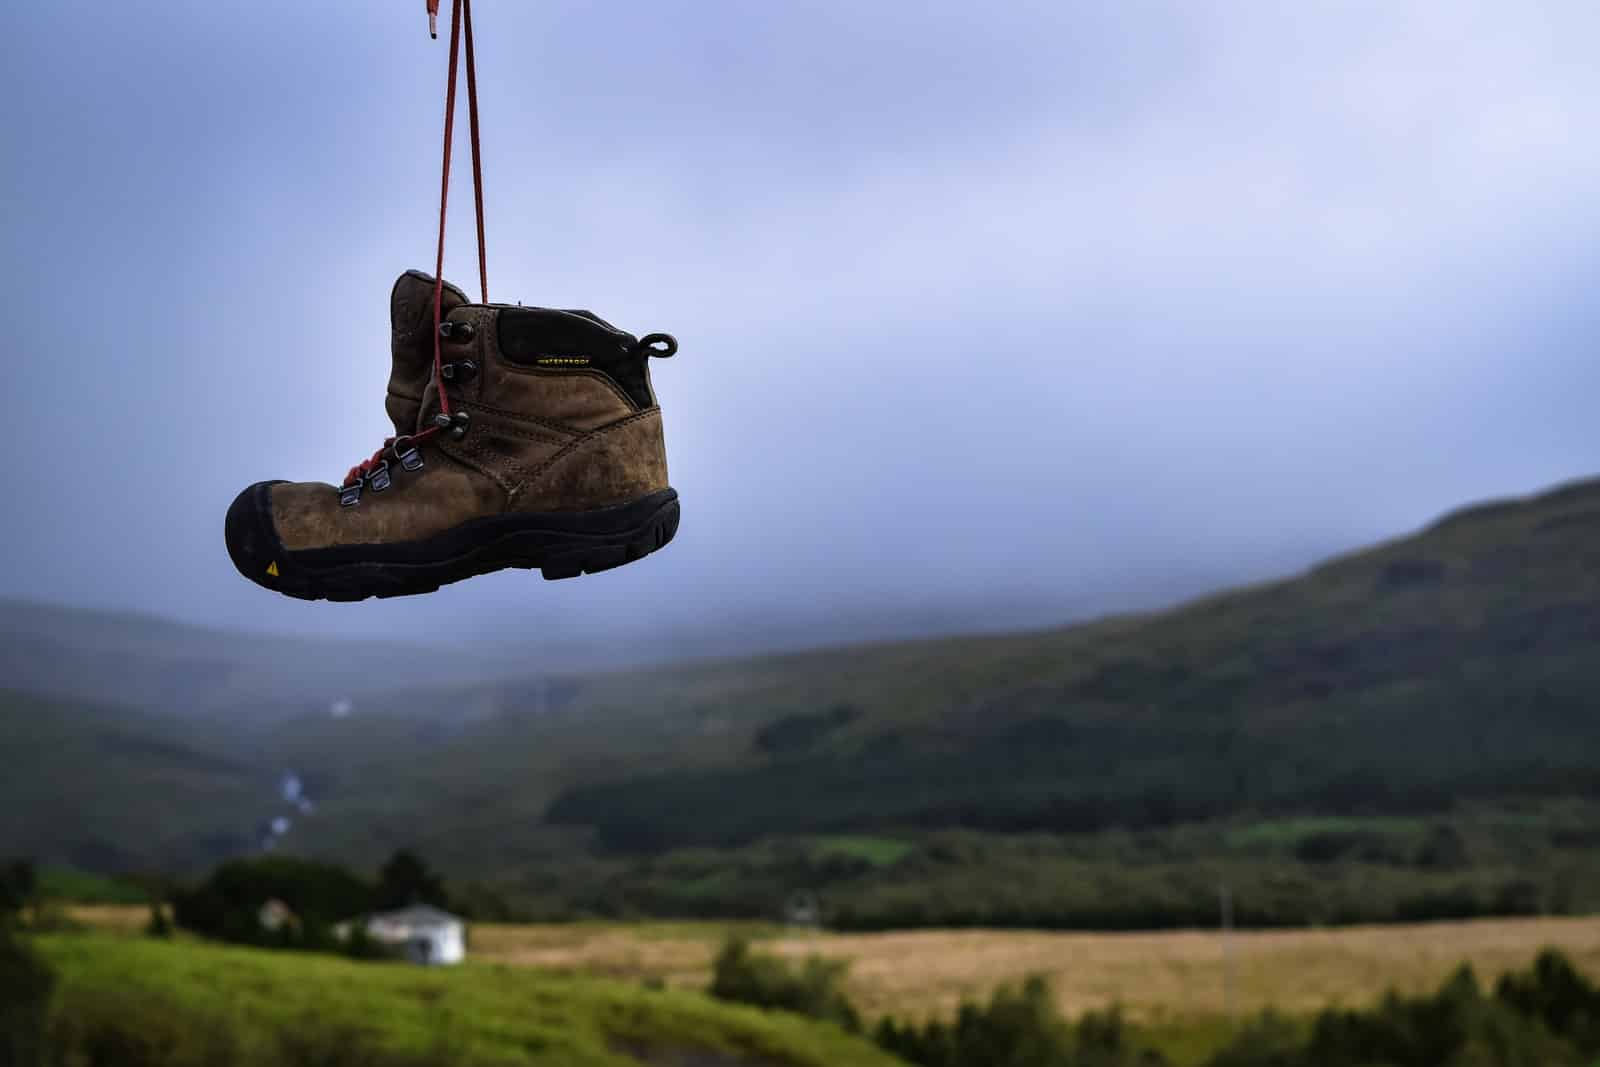 brown and black boot hanging overlooking mountain and field view during daytime